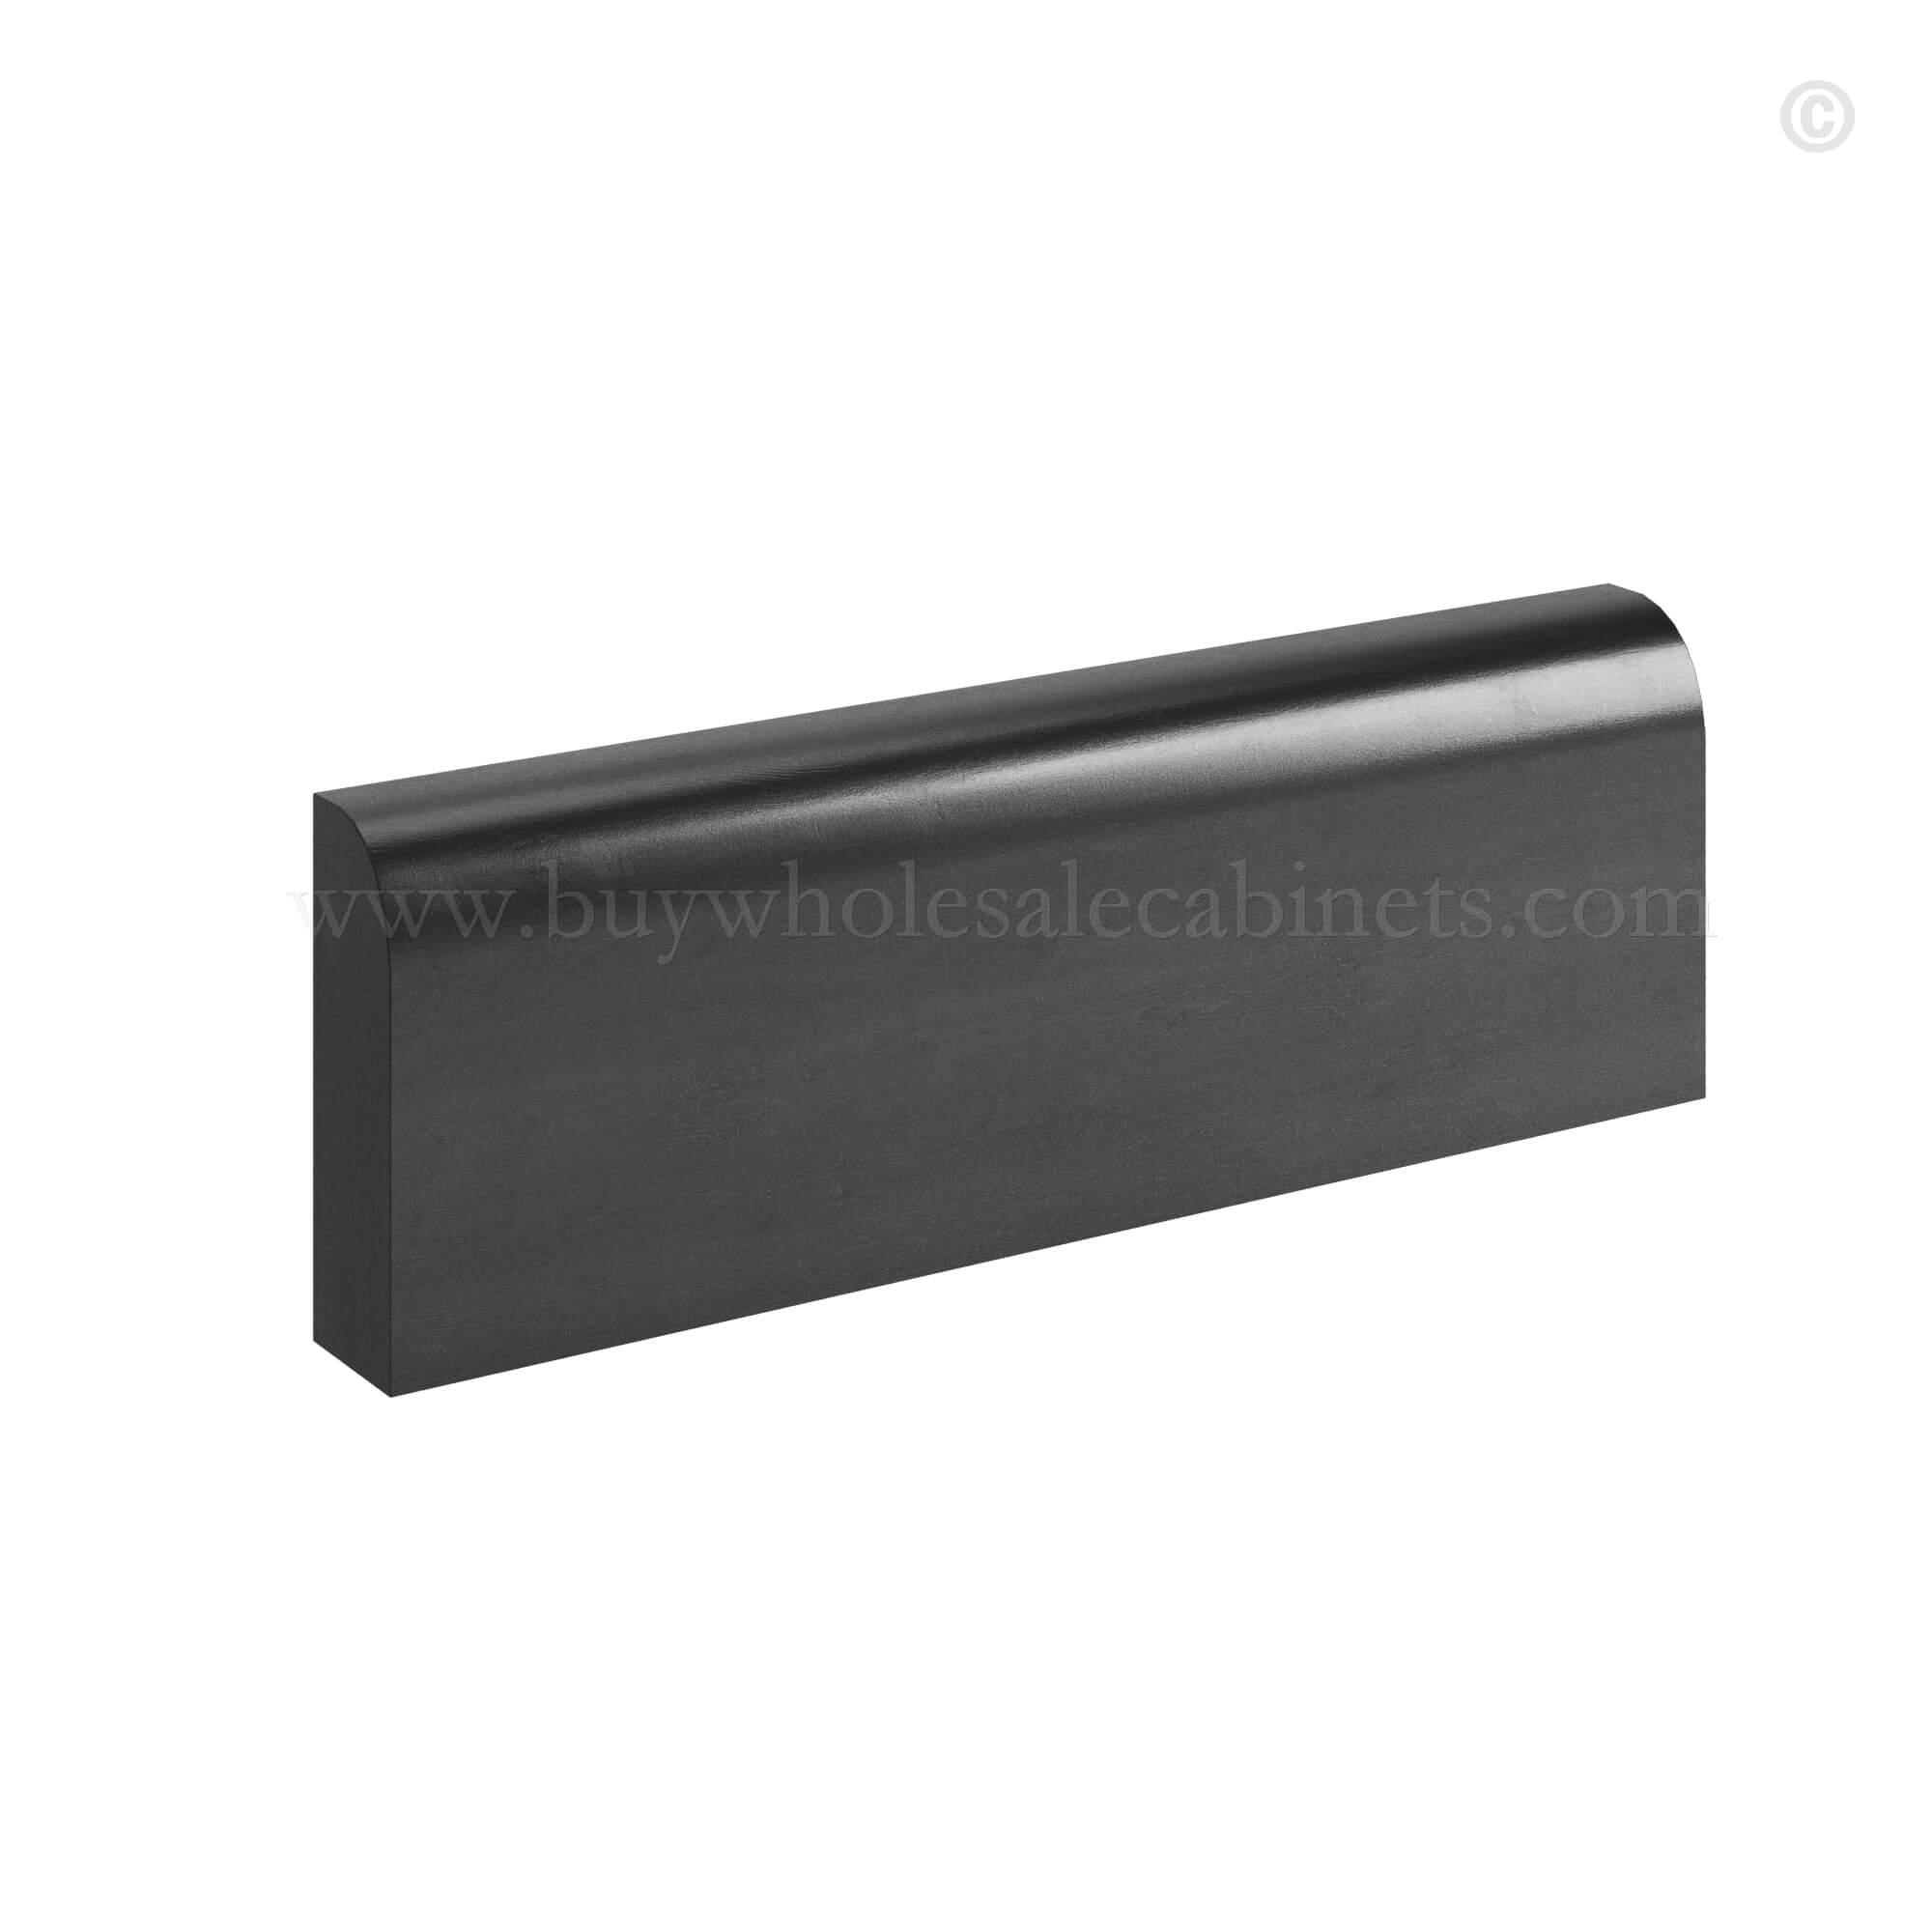 charcoal black shaker scribe molding, rta cabinets, wholesale cabinets